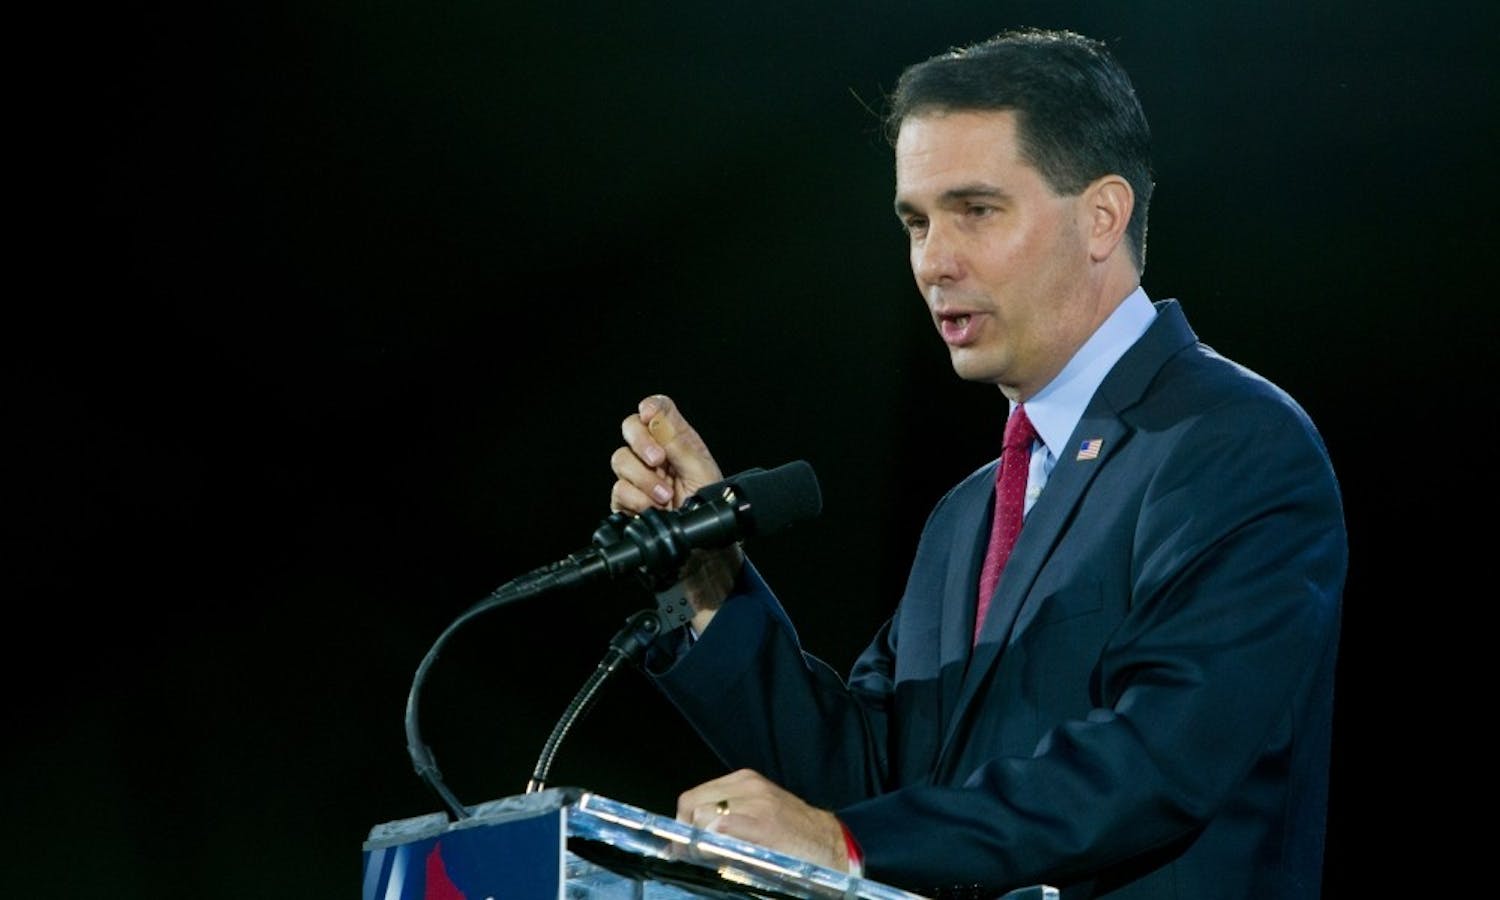 Gov. Scott Walker announced part of his state budget proposal Tuesday, which includes a 5 percent tuition cut for all in-state UW System undergrads.